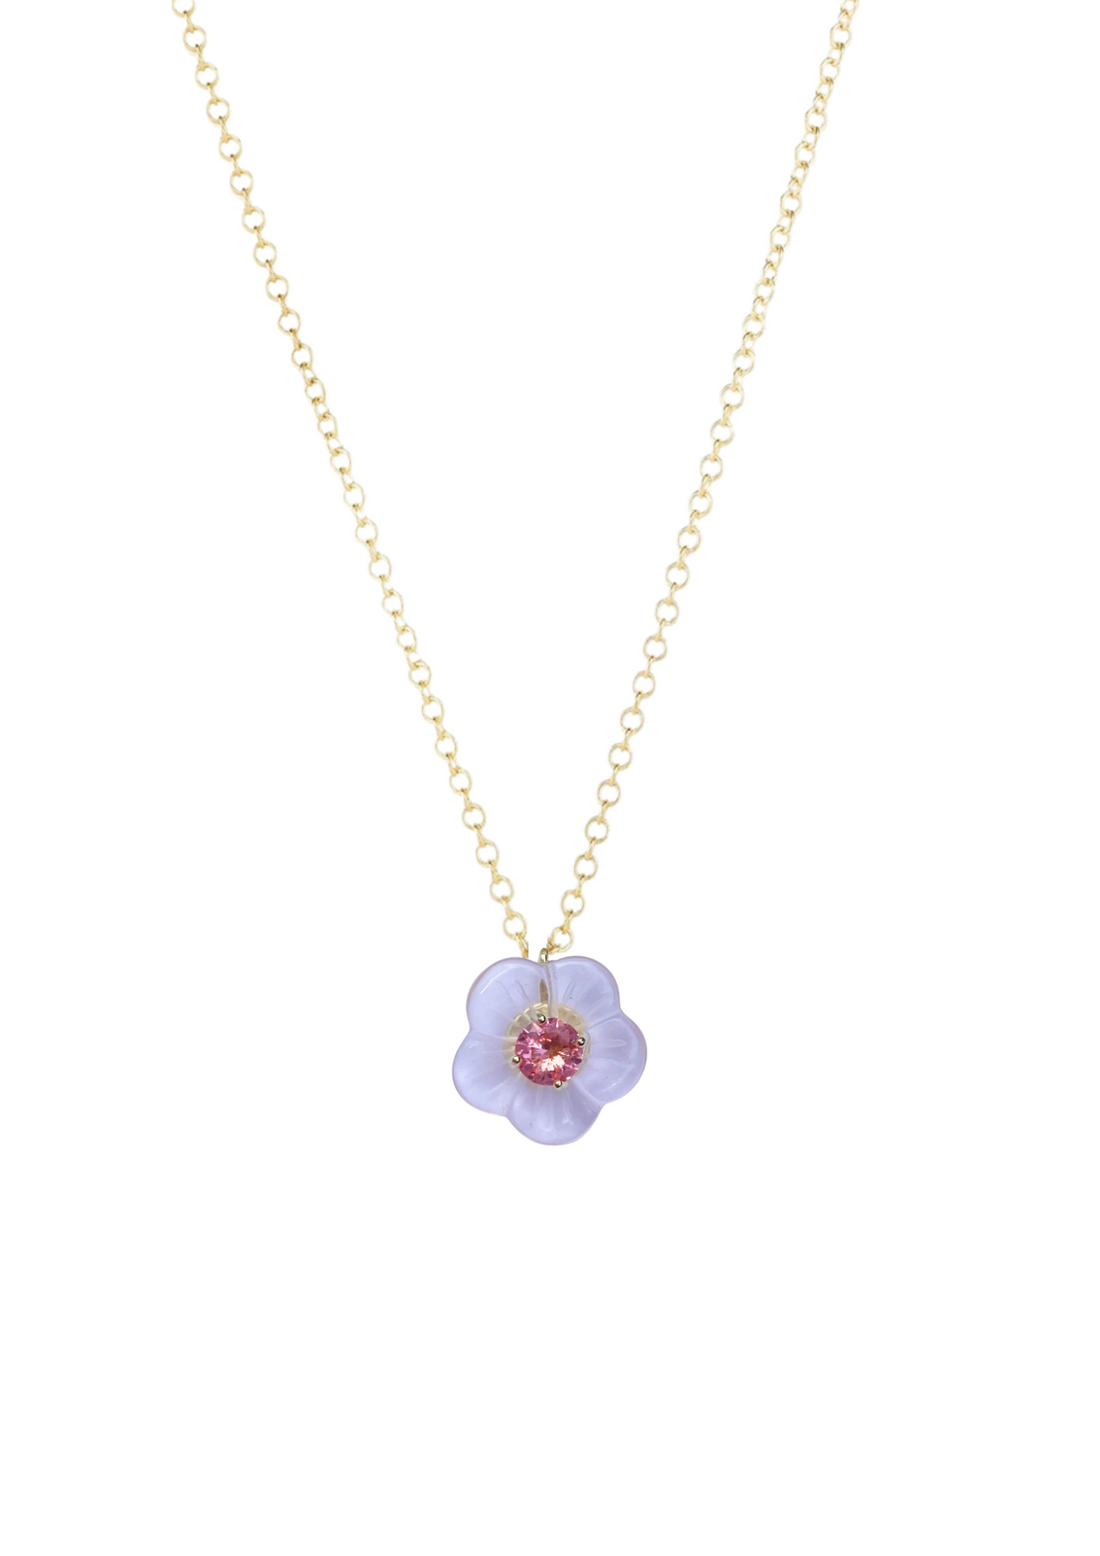 Limited Edition: Petal Pink Chinoiserie Flower Necklace